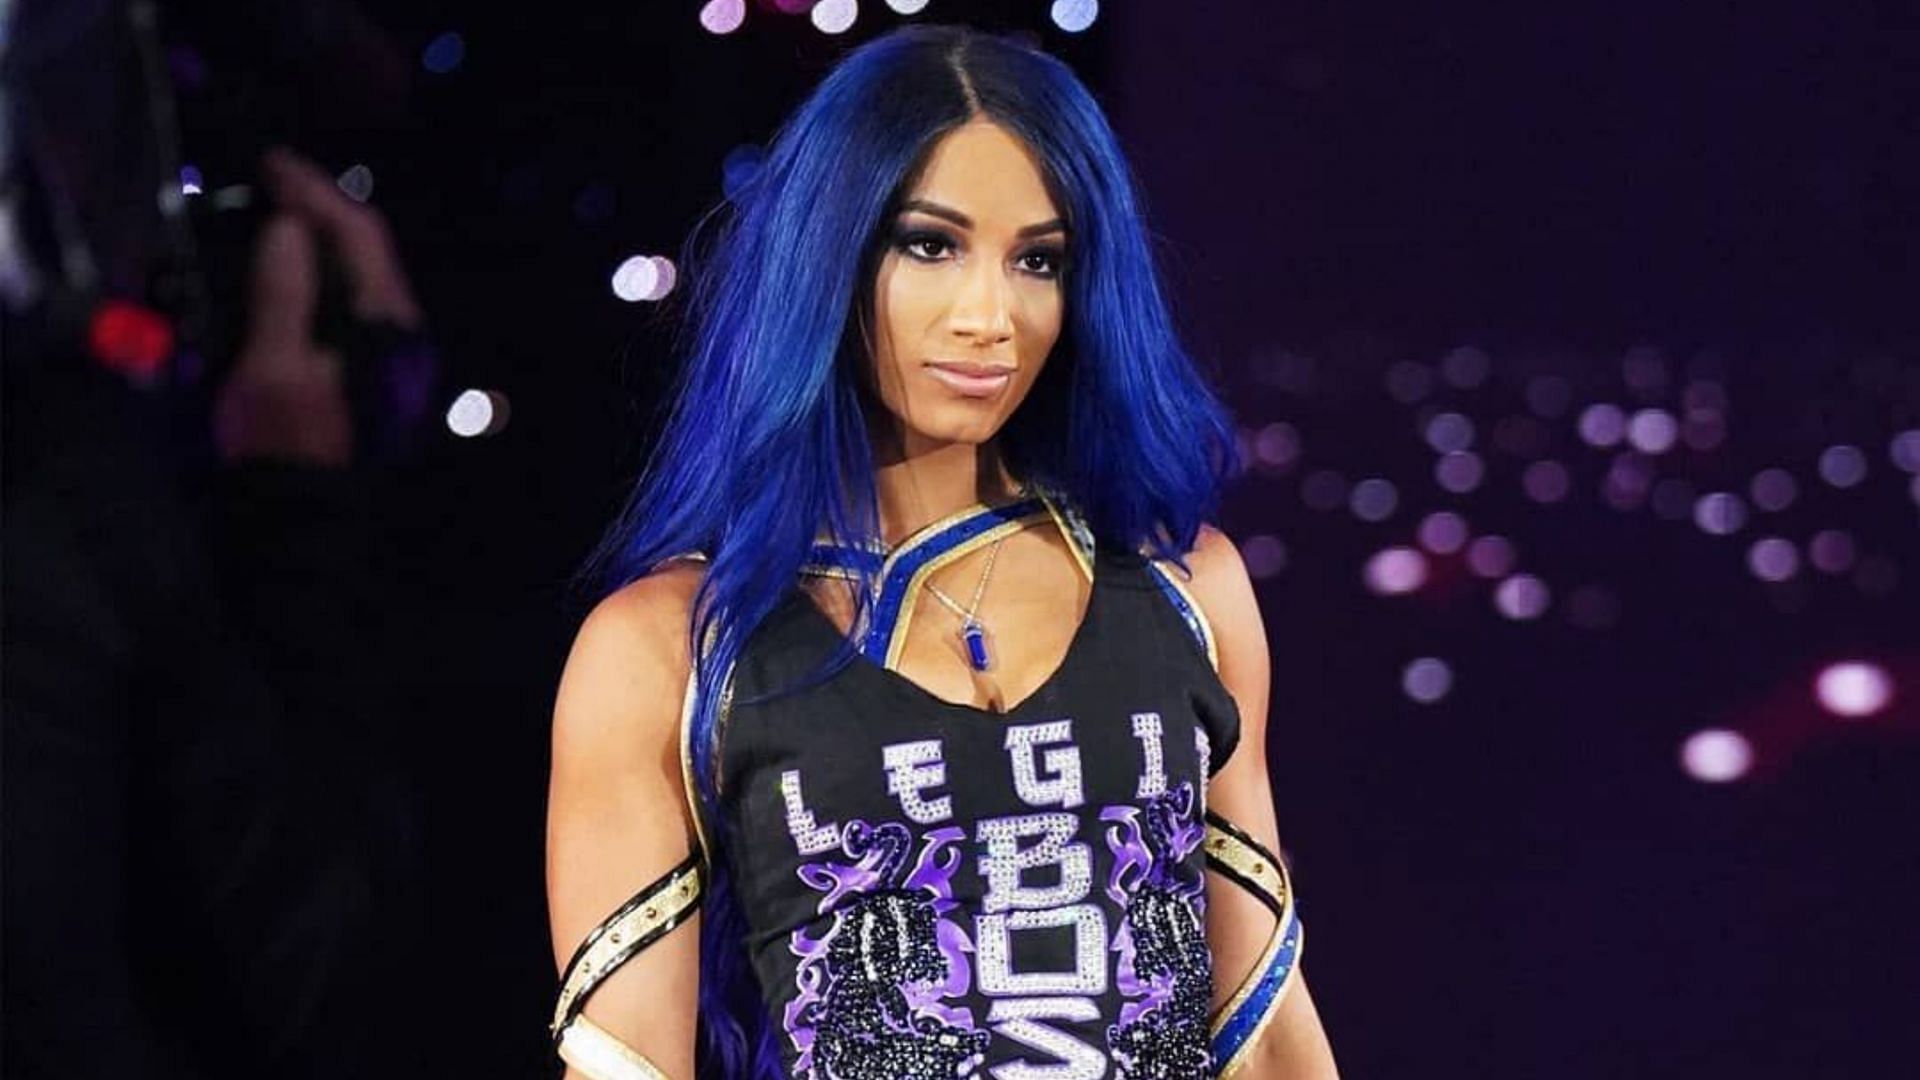 Sasha Banks walked out during an episode of Monday Night RAW last May